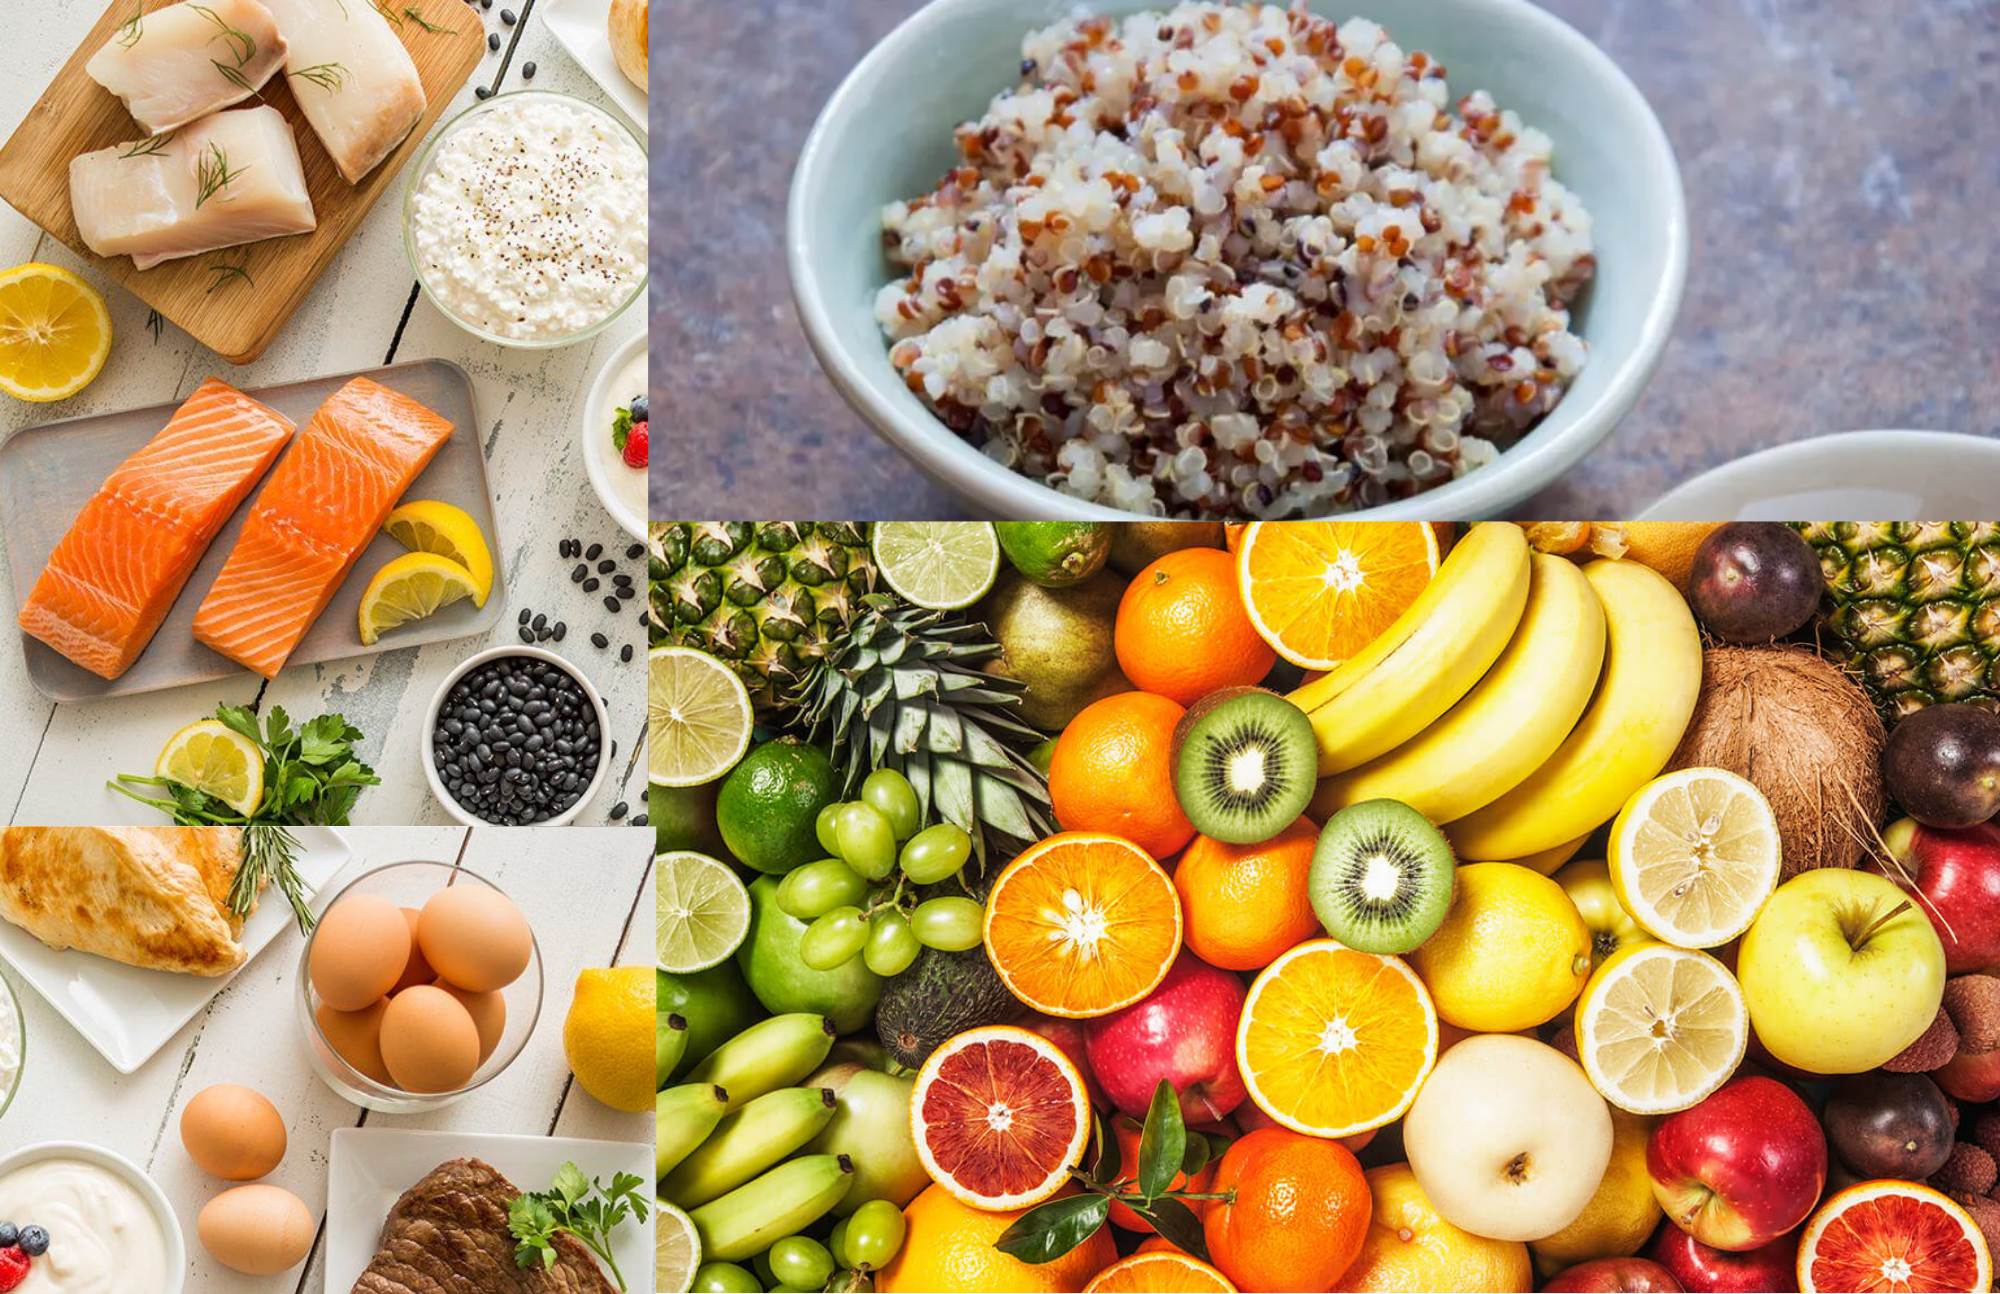 Three healthy foods which are quinoa, fruits, and lean meats in one picture